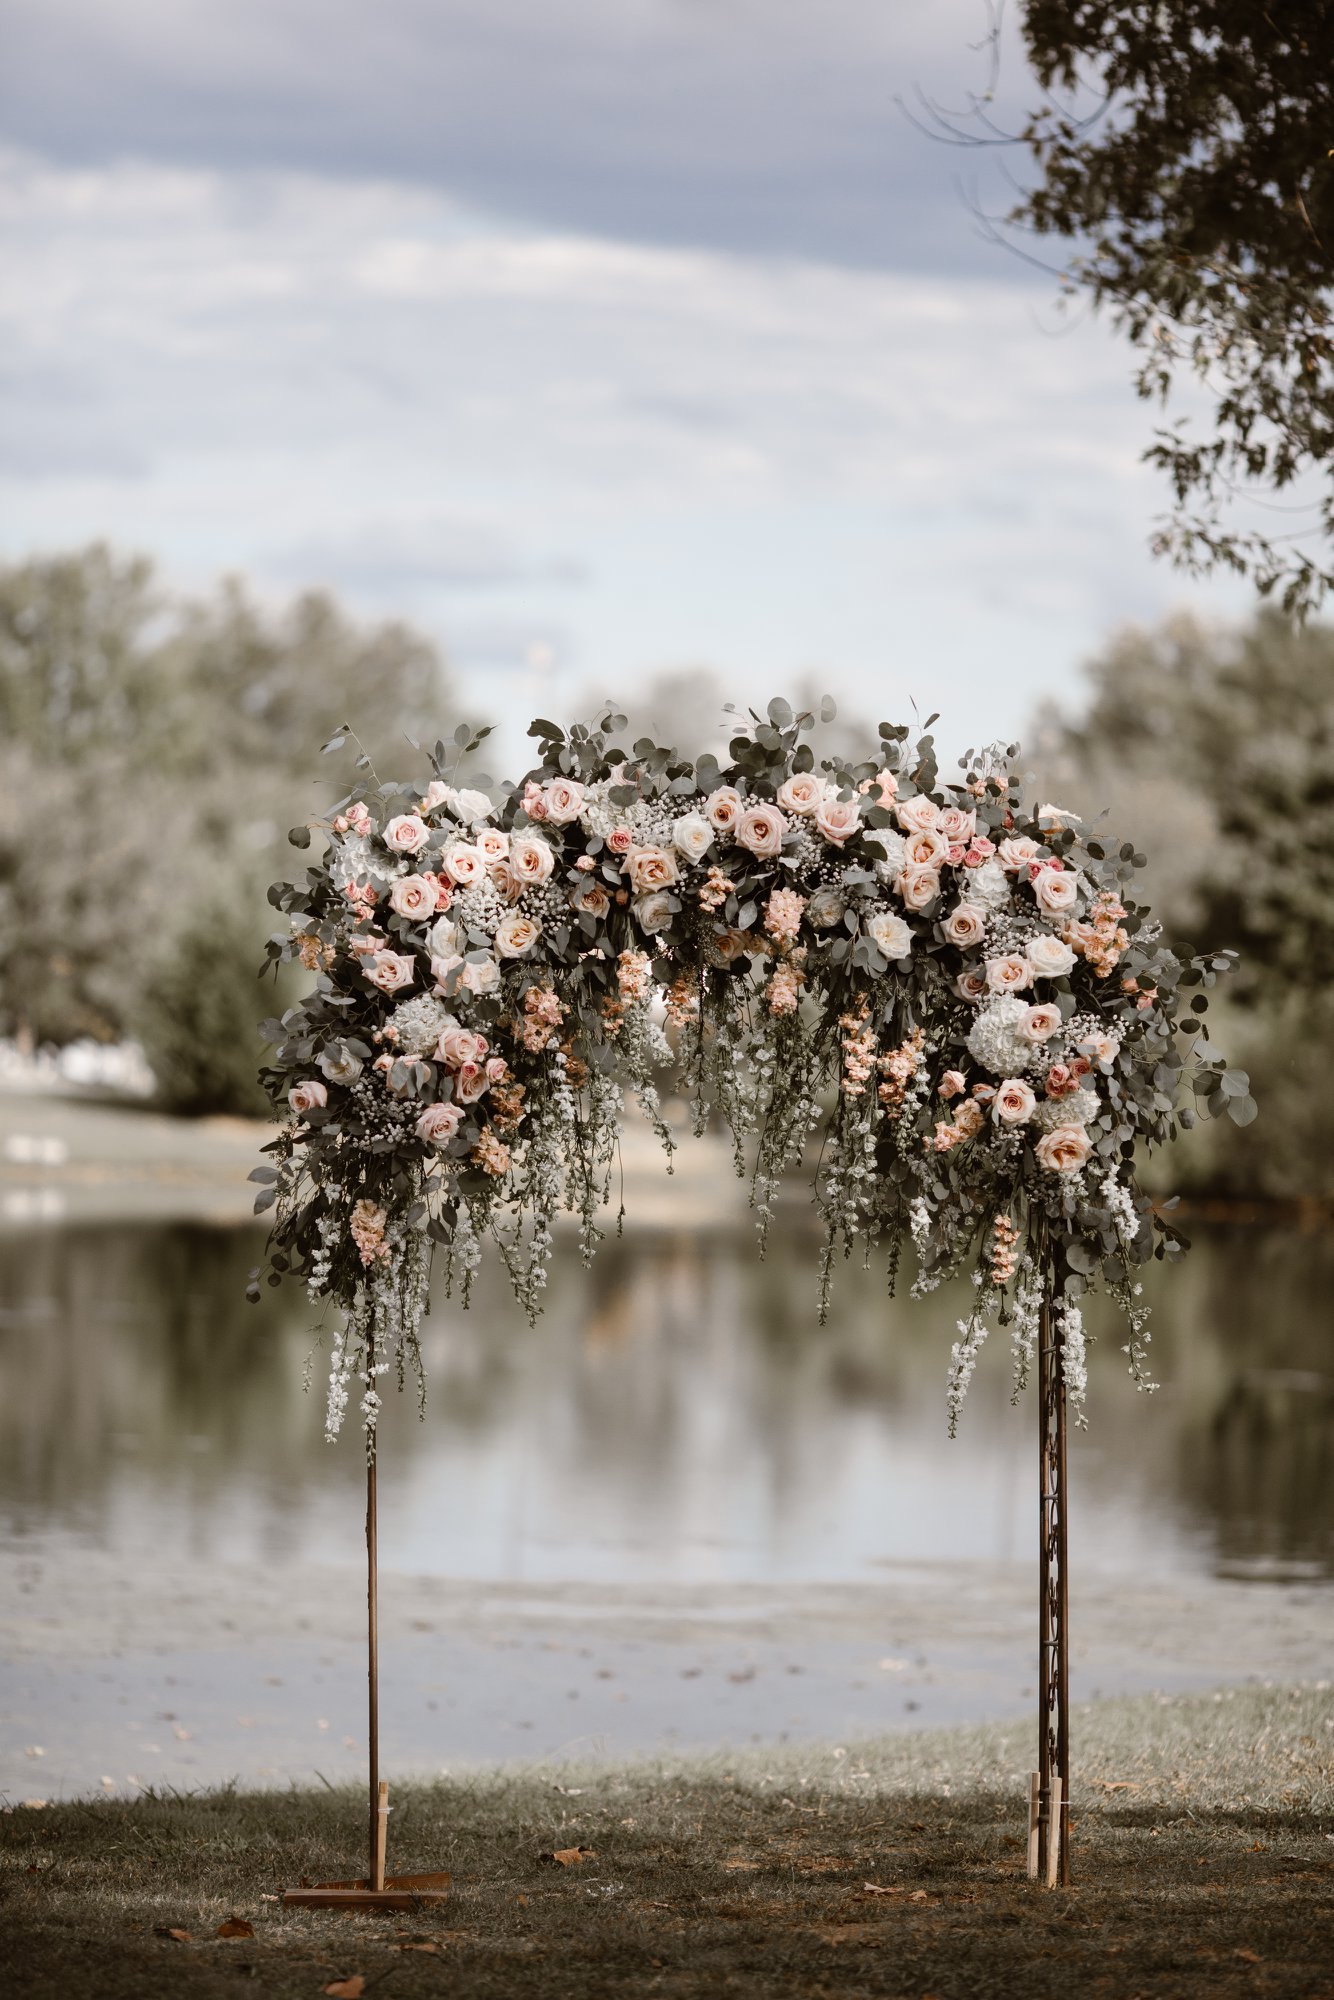 Wedding arch covered in white and pink roses from LB Floral by Erin Morrison Photography | The Pink Bride® www.thepinkbride.com